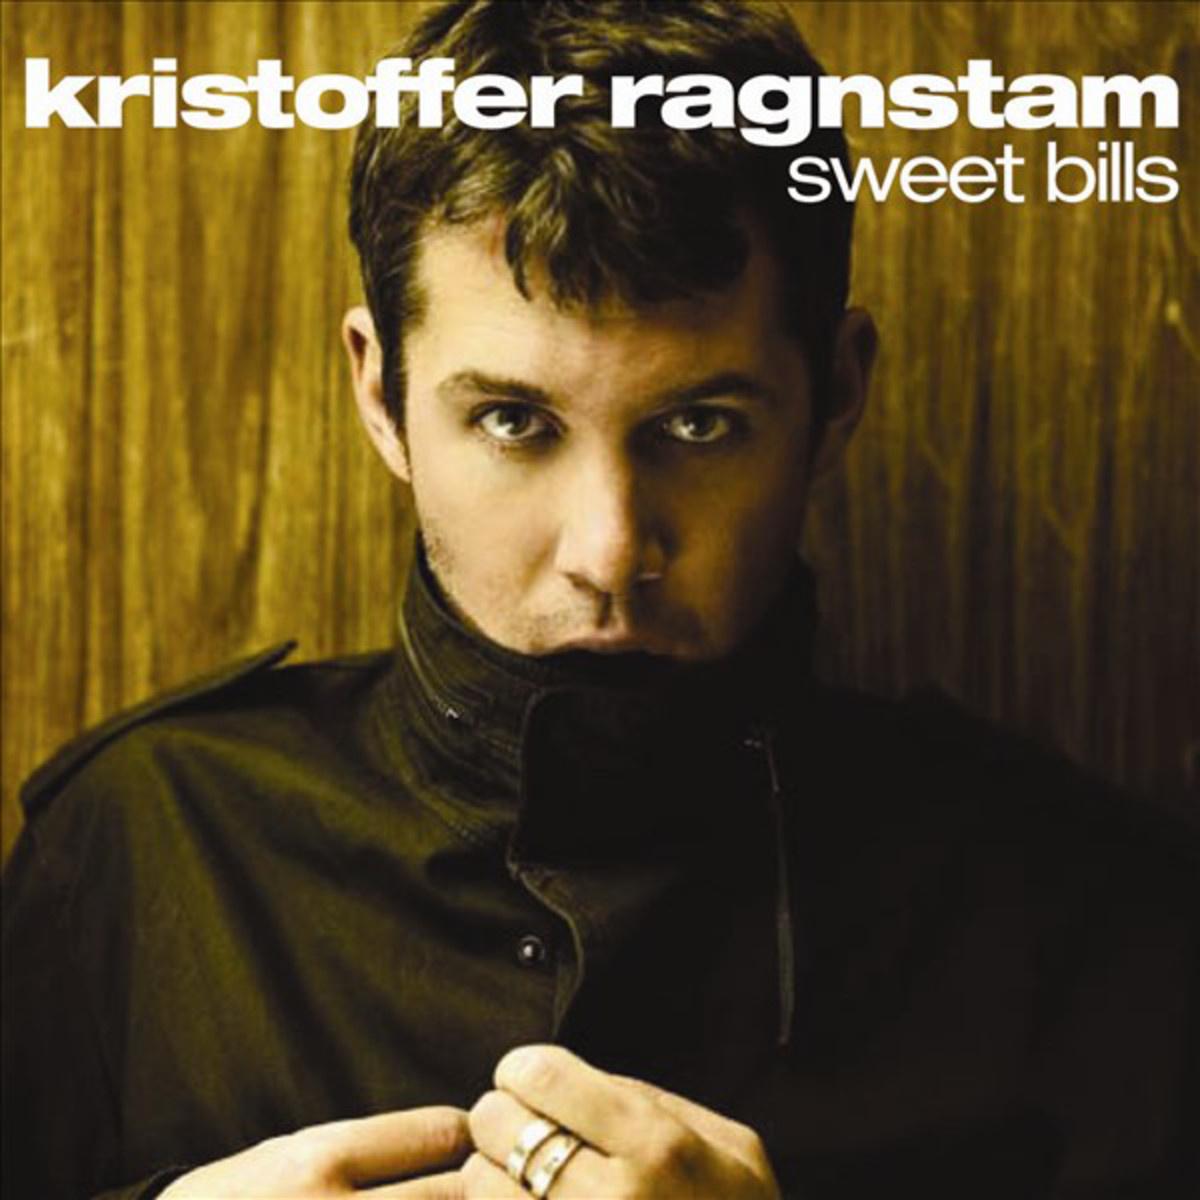 Kristoffer Ragnstam - If This Is Life